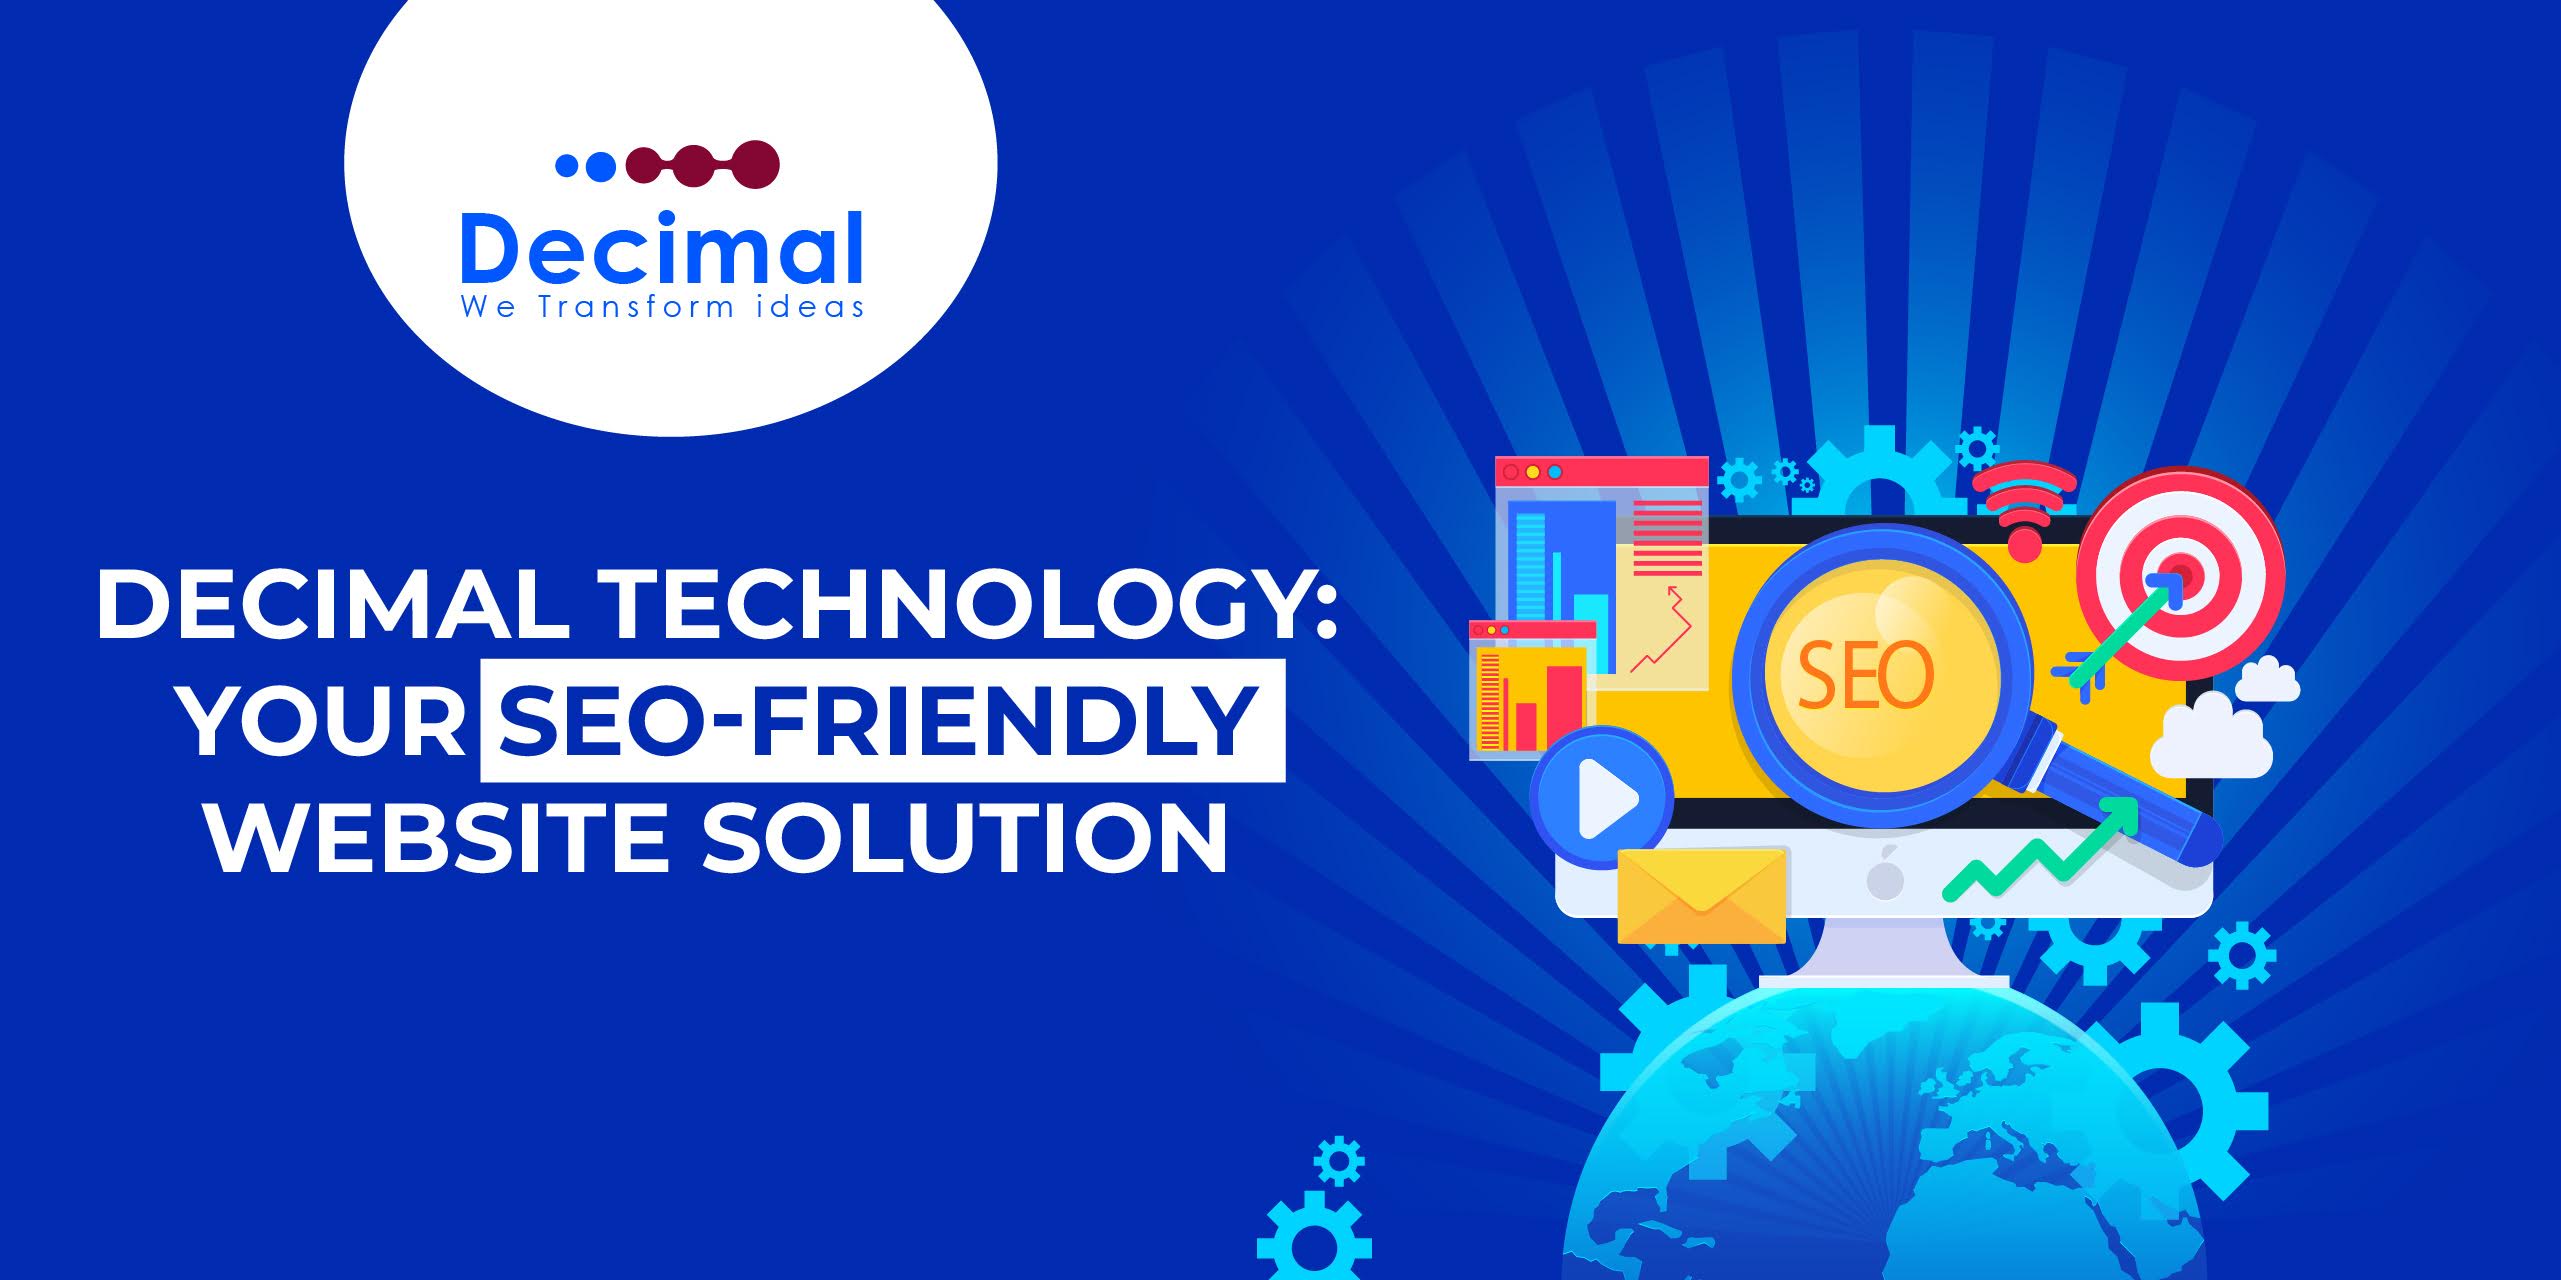 Decimal Technology: Your SEO-Friendly Website Solution